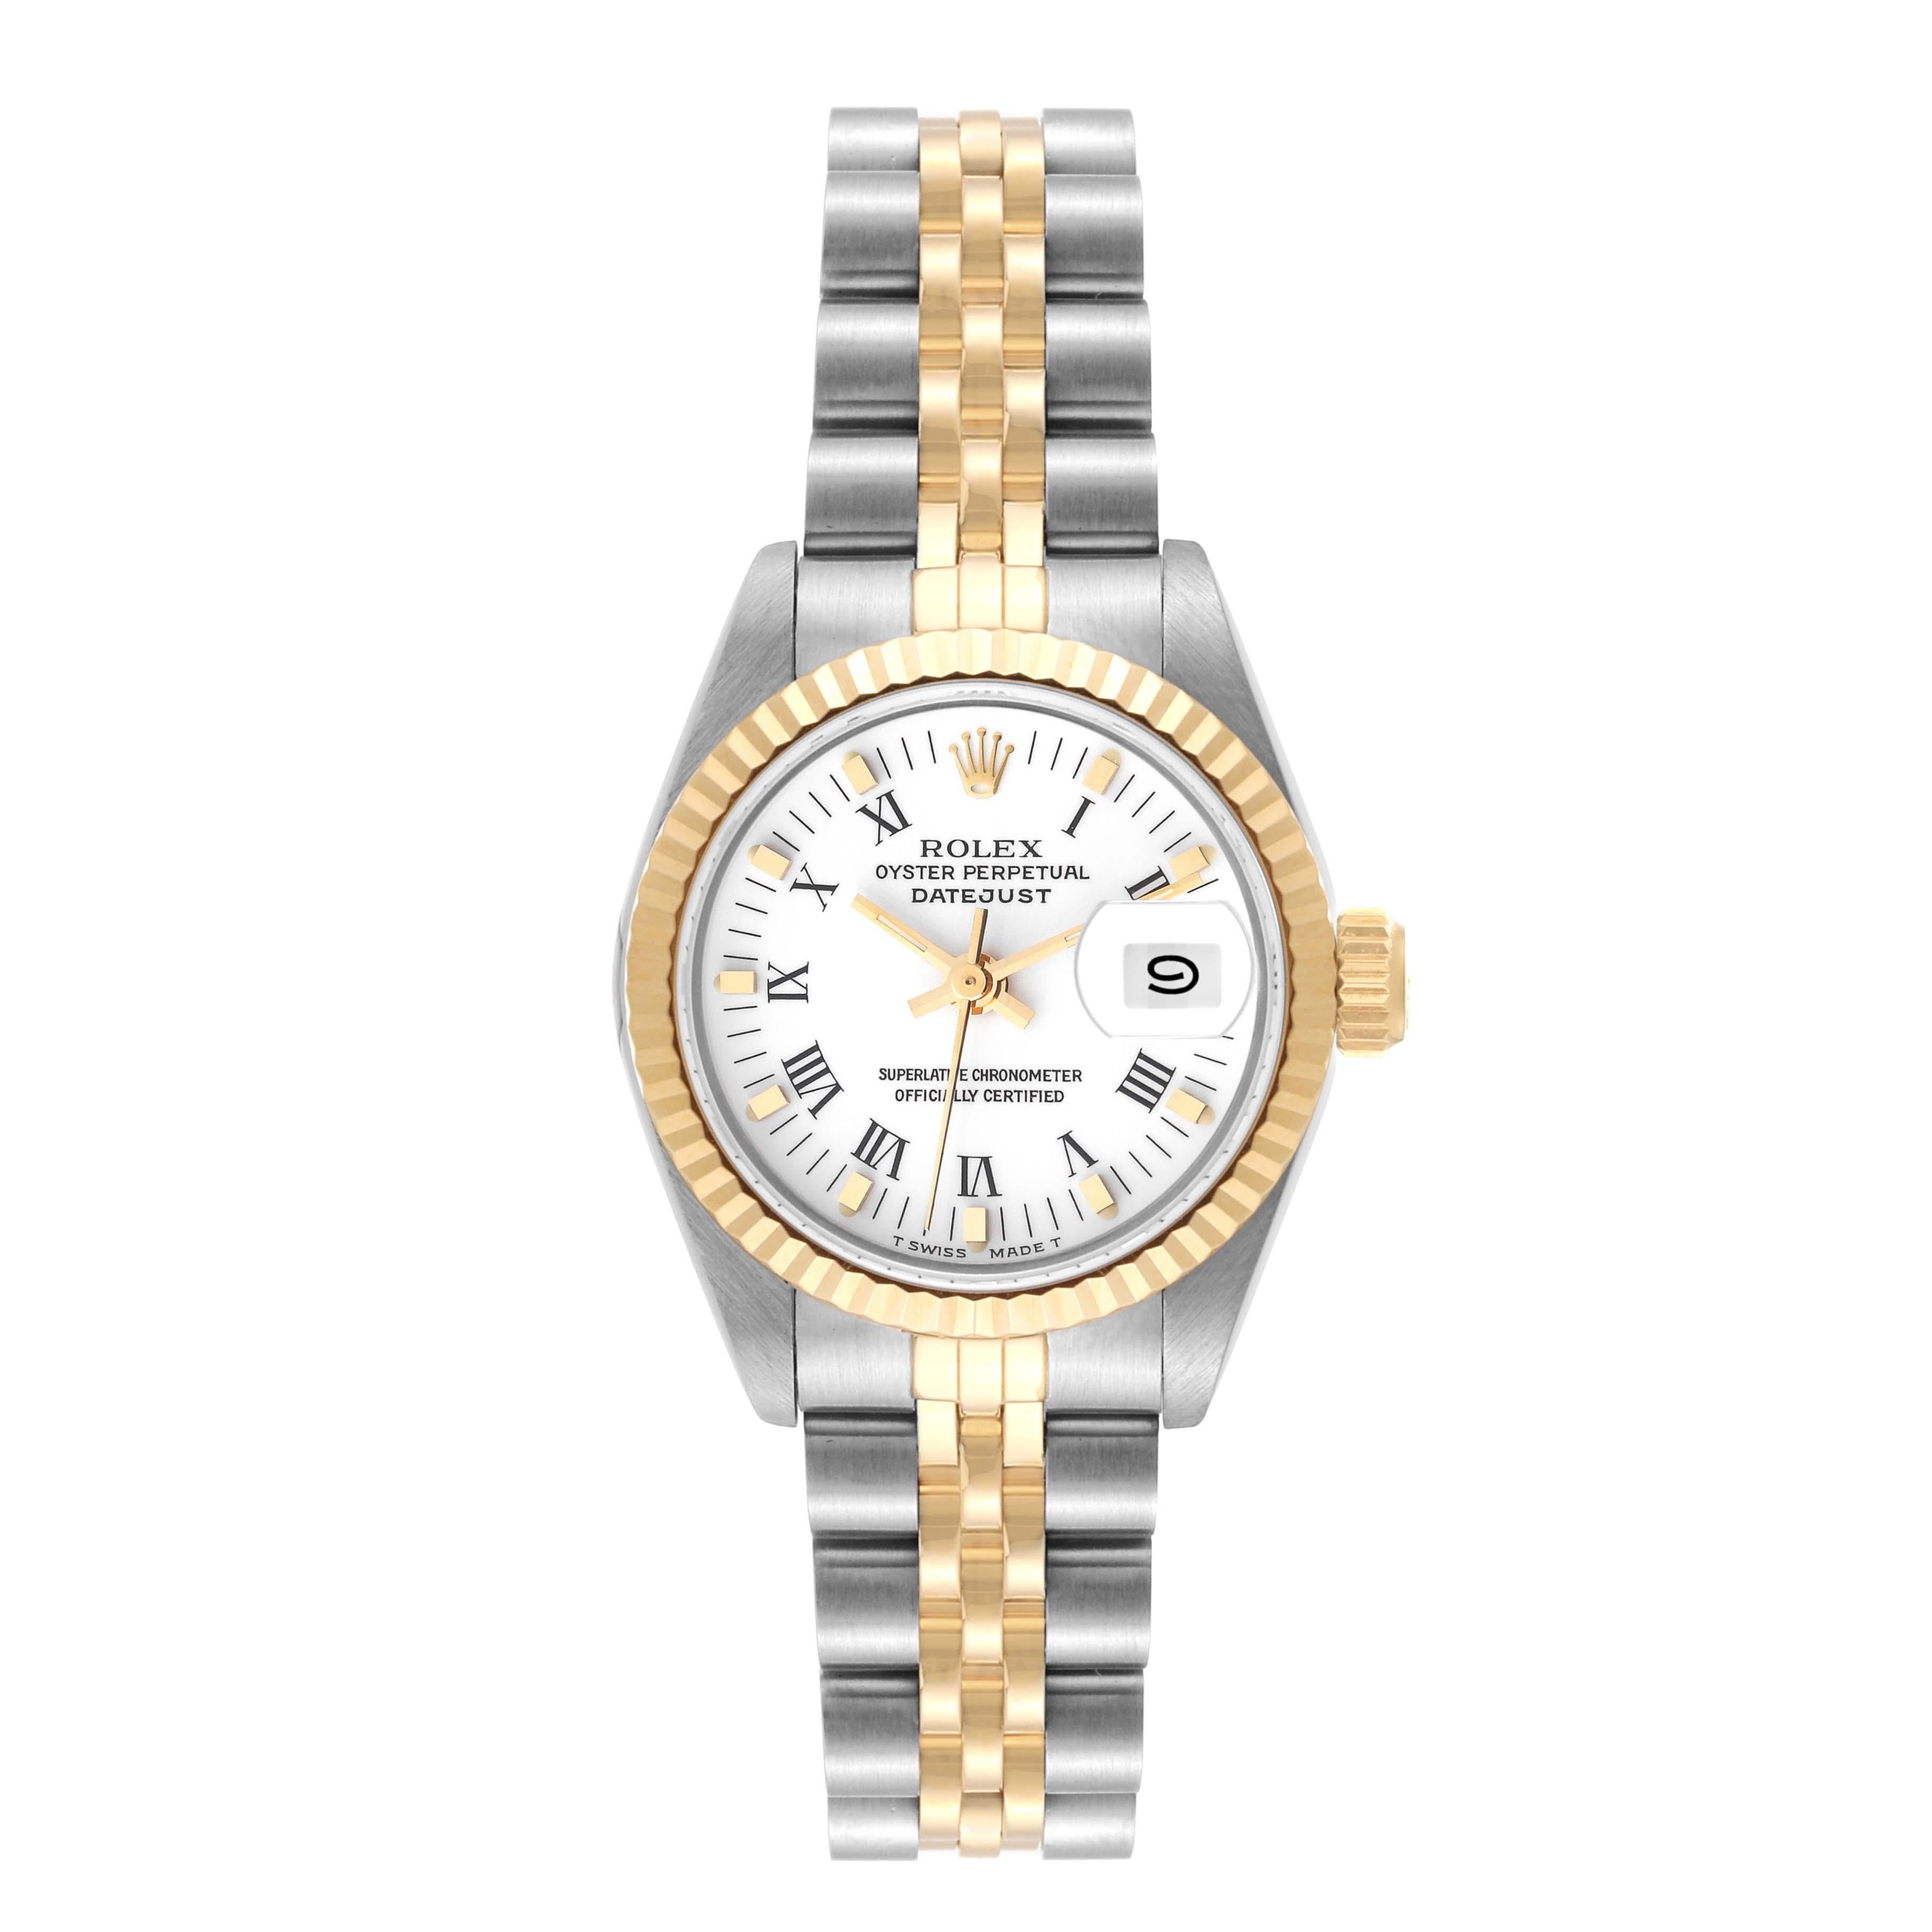 Rolex Datejust Steel Yellow Gold White Dial Ladies Watch 69173 Box Papers. Officially certified chronometer automatic self-winding movement. Stainless steel oyster case 26.0 mm in diameter. Rolex logo on the crown. 18k yellow gold fluted bezel.